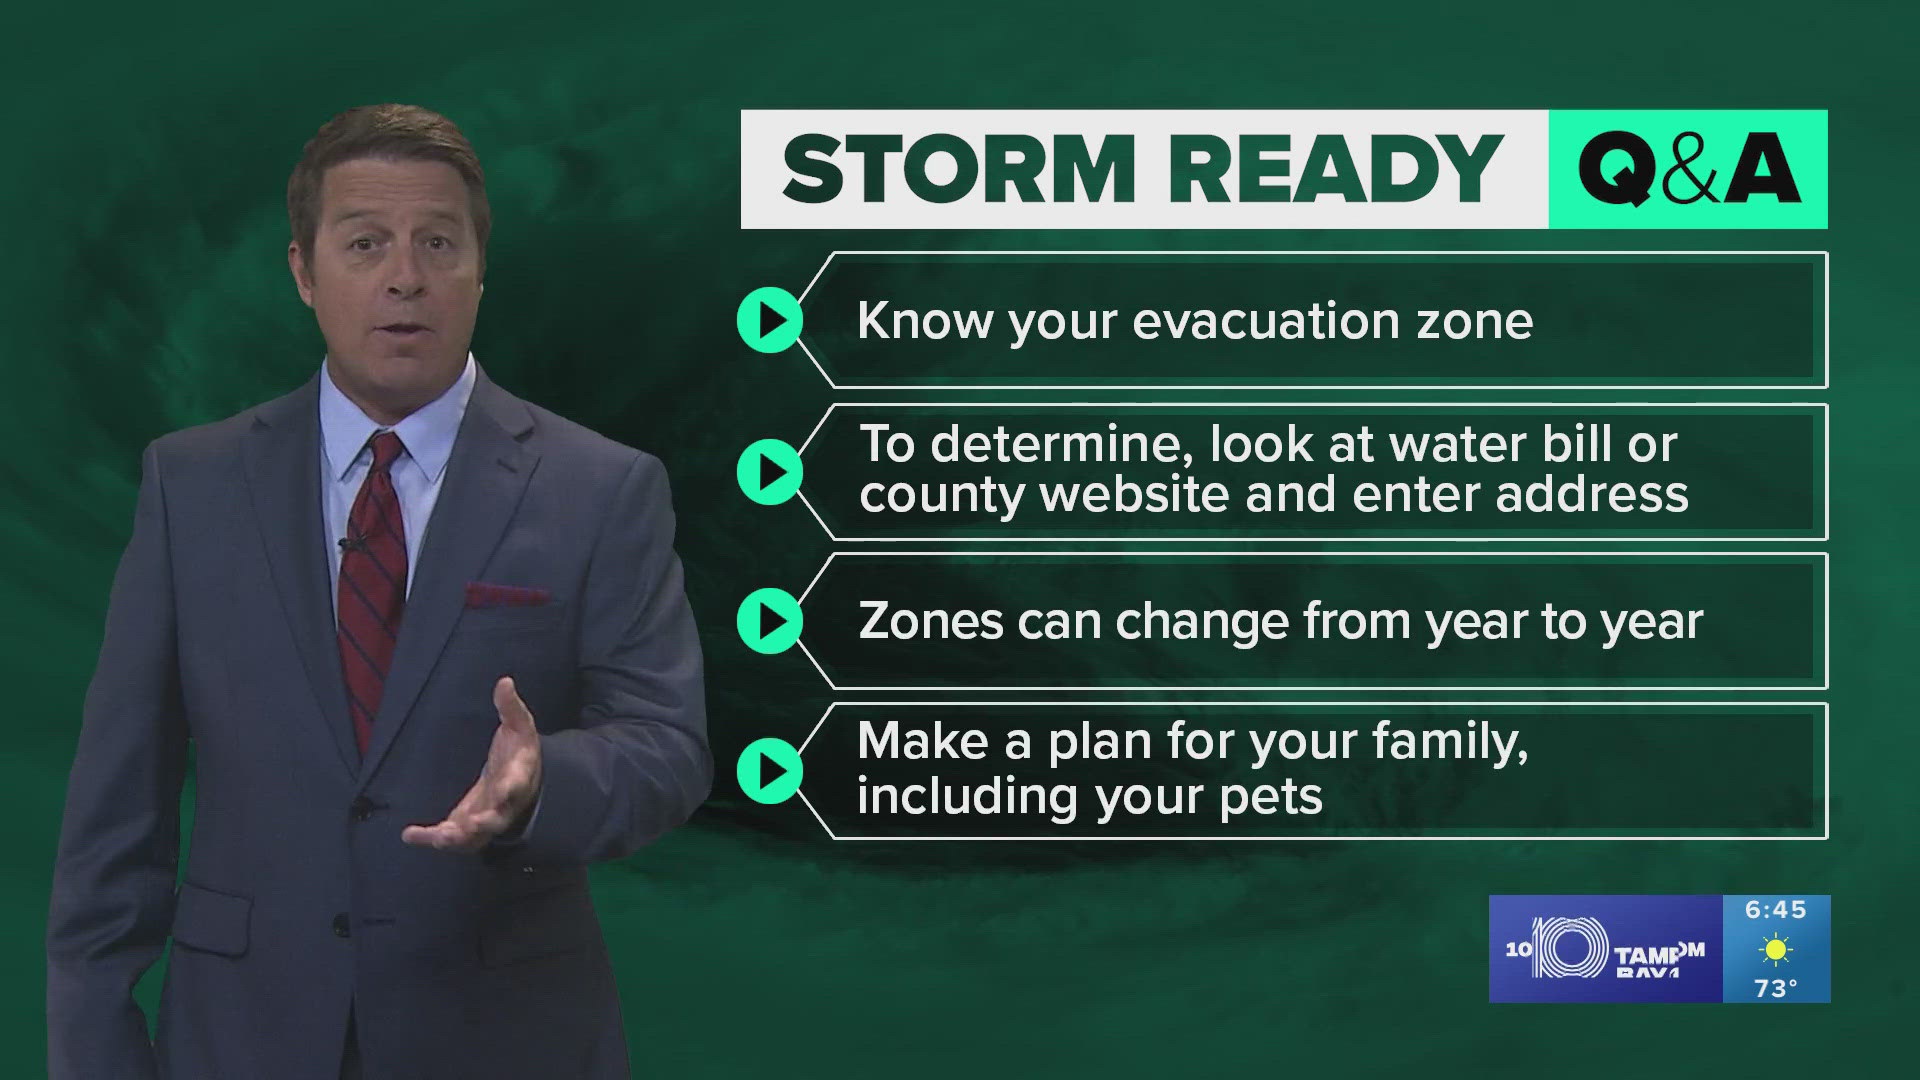 To find your evacuation zone, look at your water bill or on your counties website and put in your address.